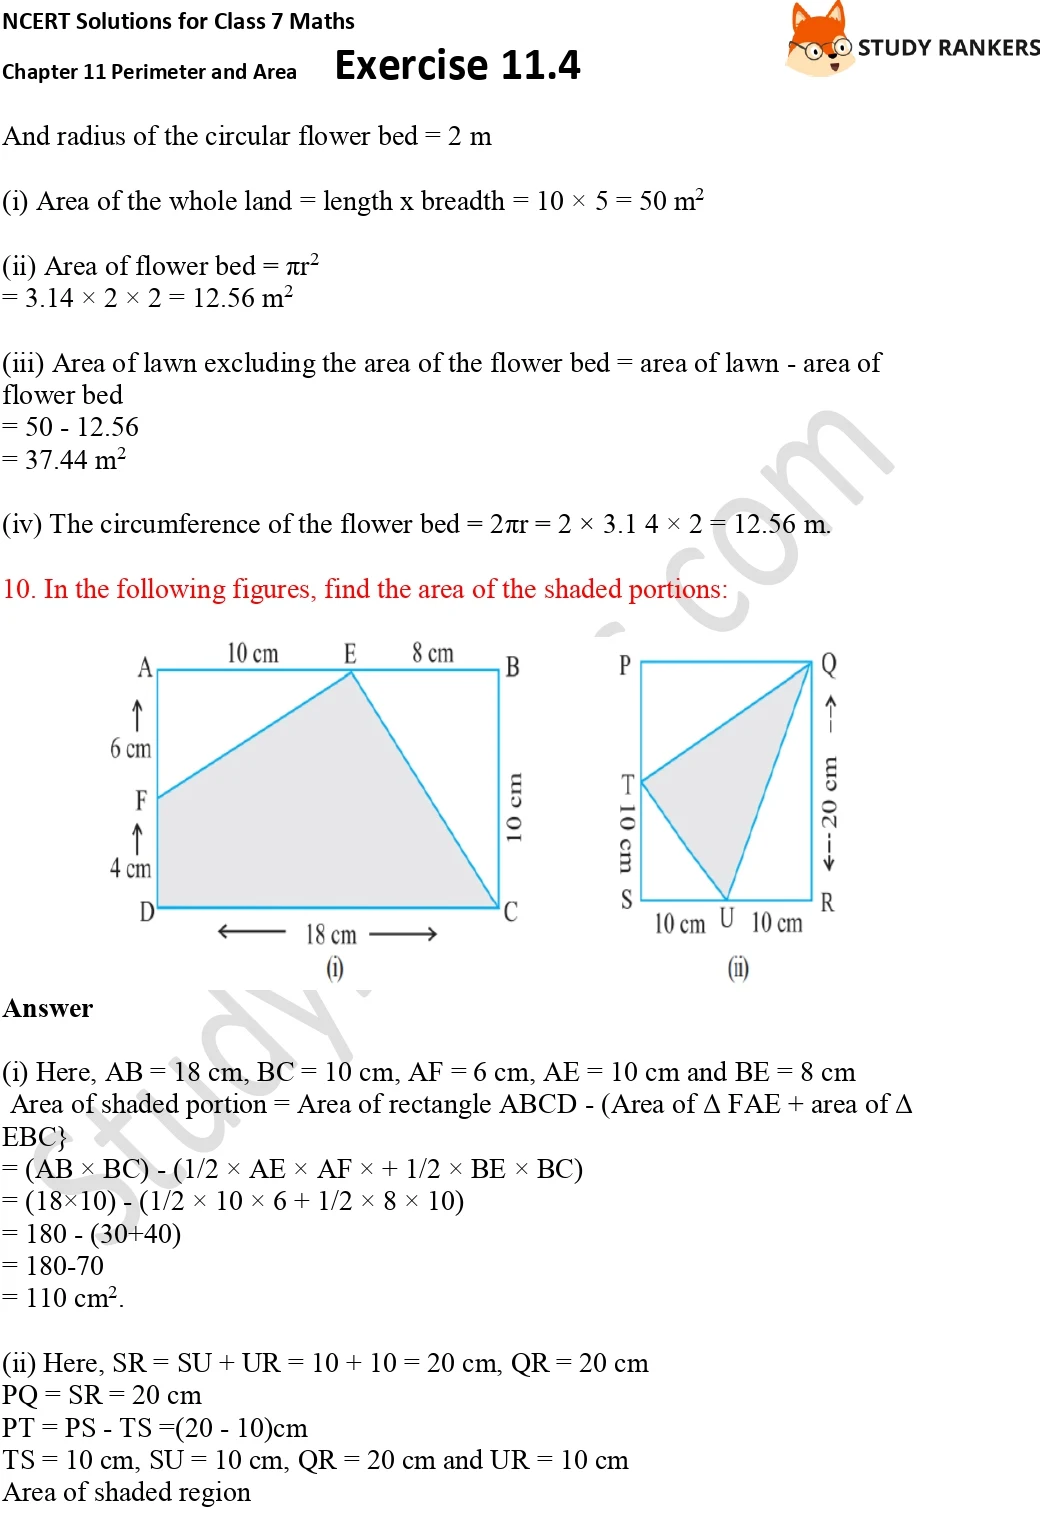 NCERT Solutions for Class 7 Maths Ch 11 Perimeter and Area Exercise 11.4 Part 7